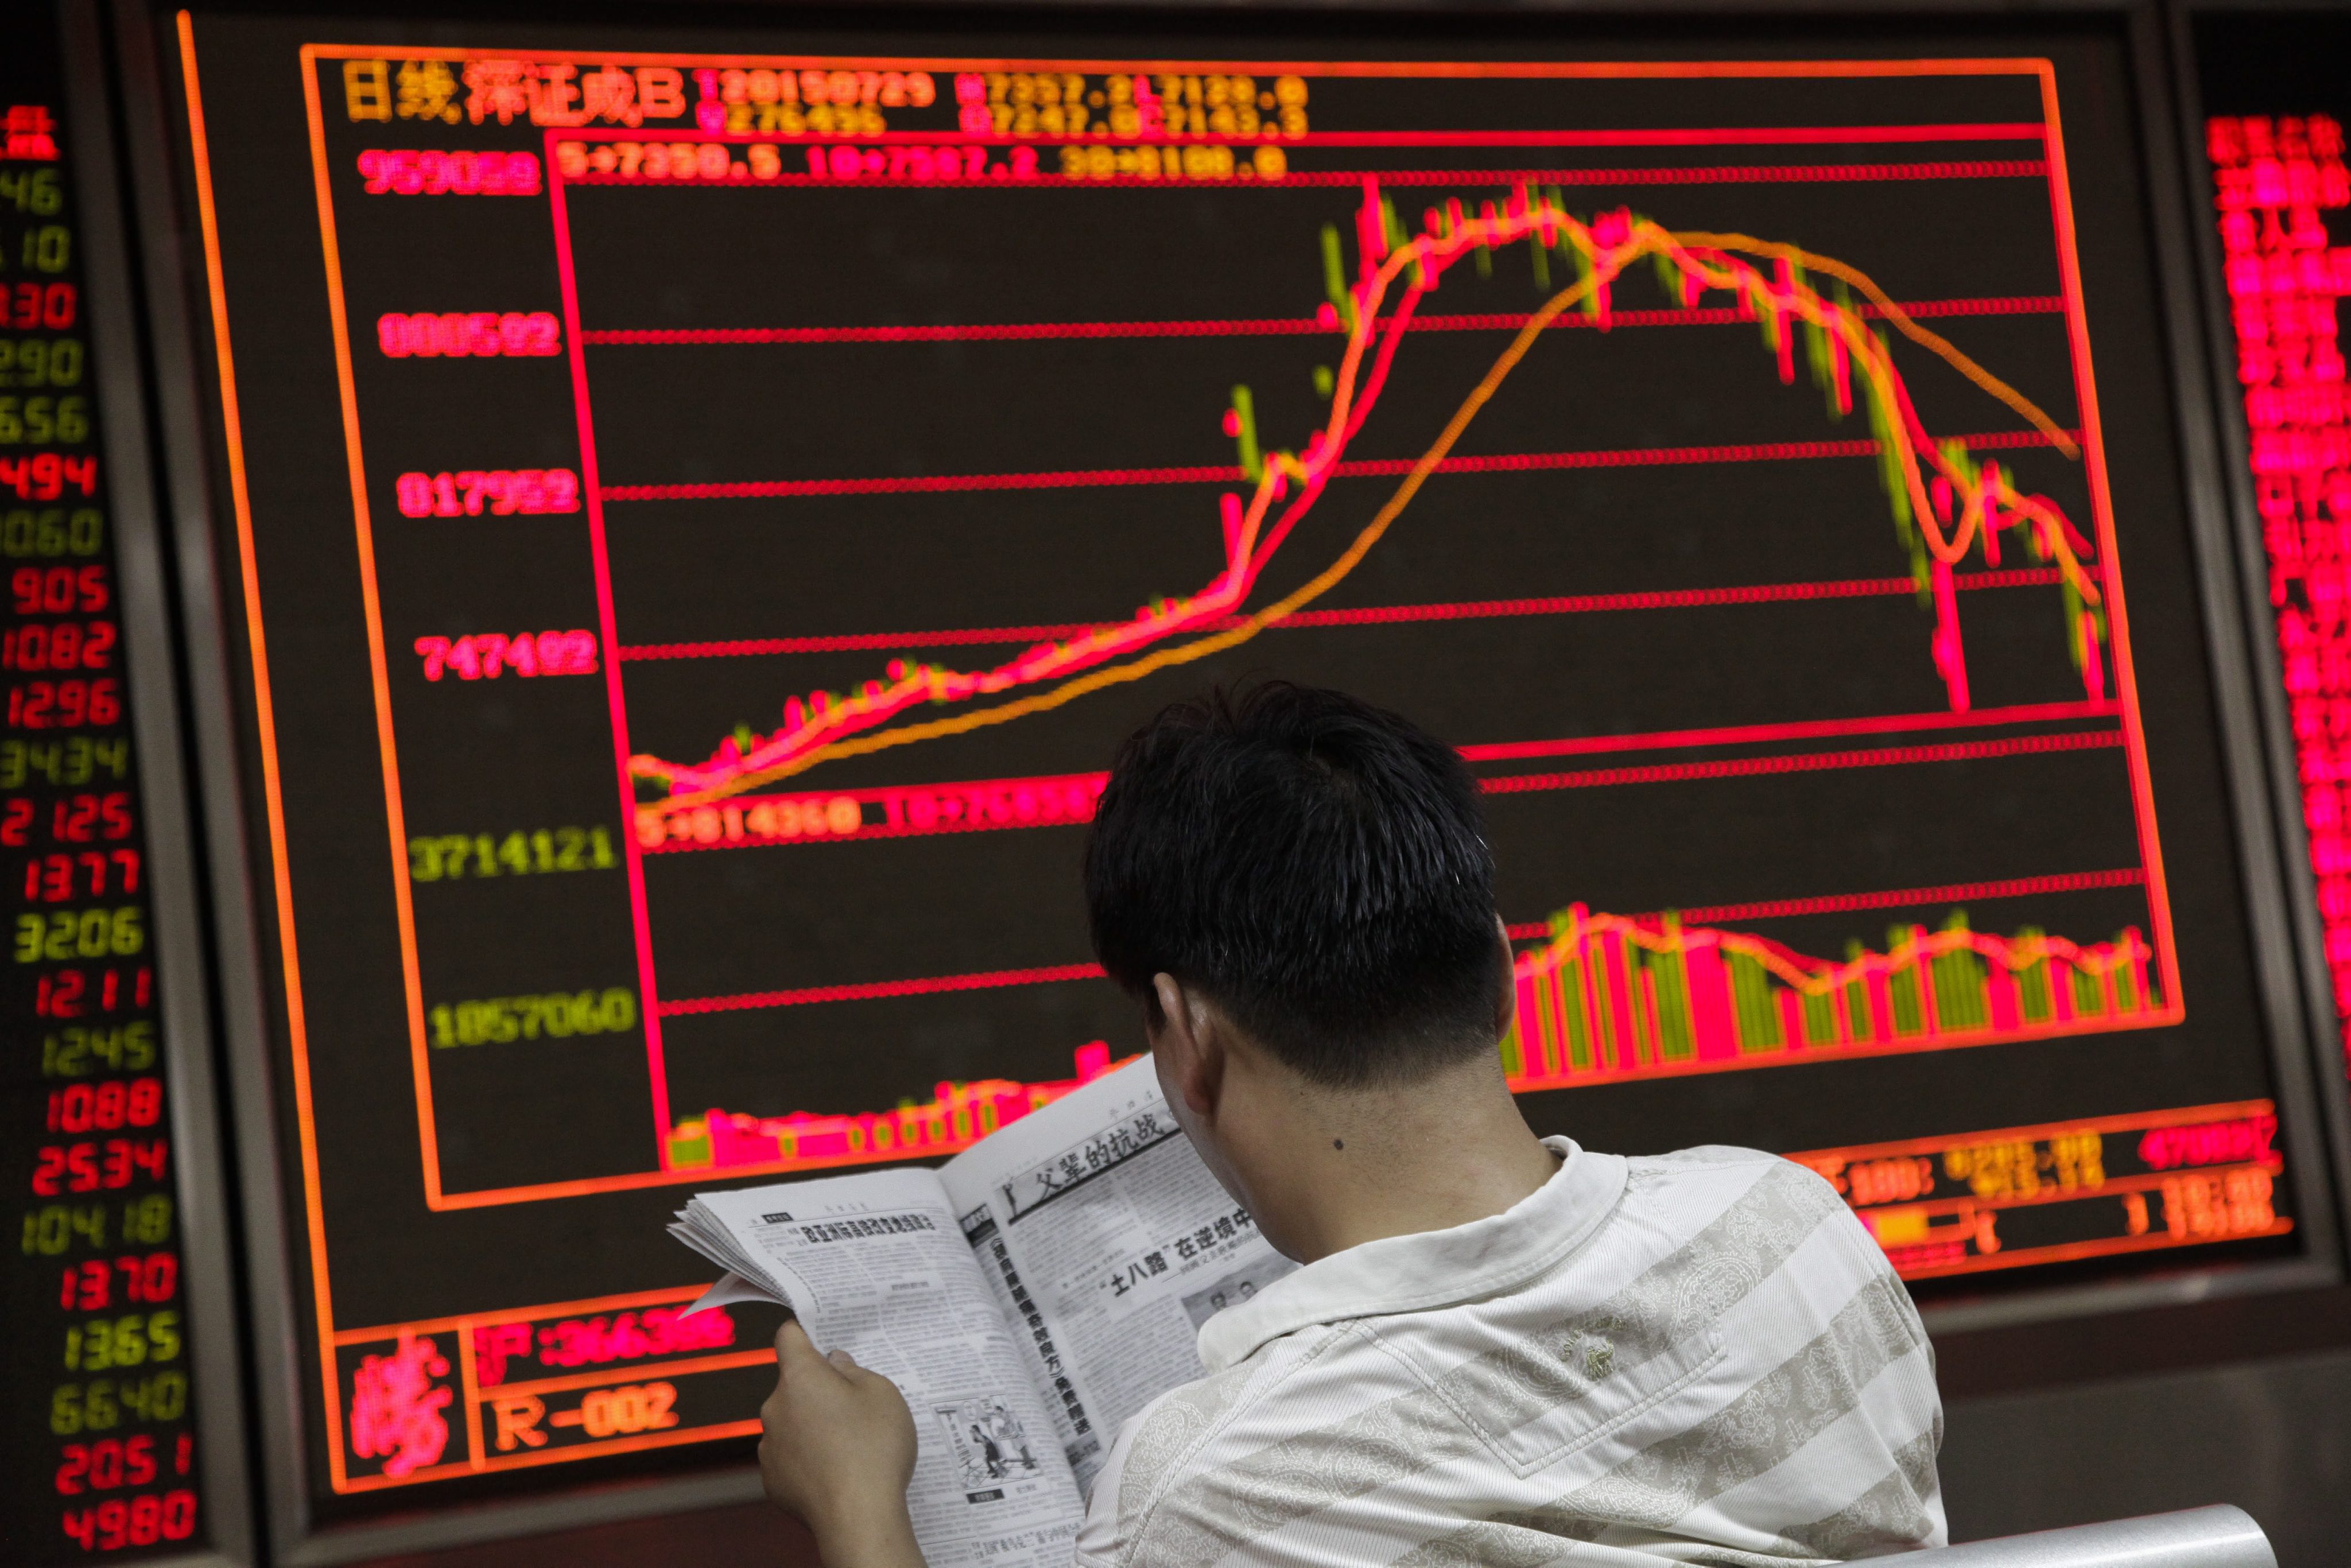 An investor reads a newspaper as an electronic board shows stock market data at a securities brokerage house in Beijing, China. Photo: EPA